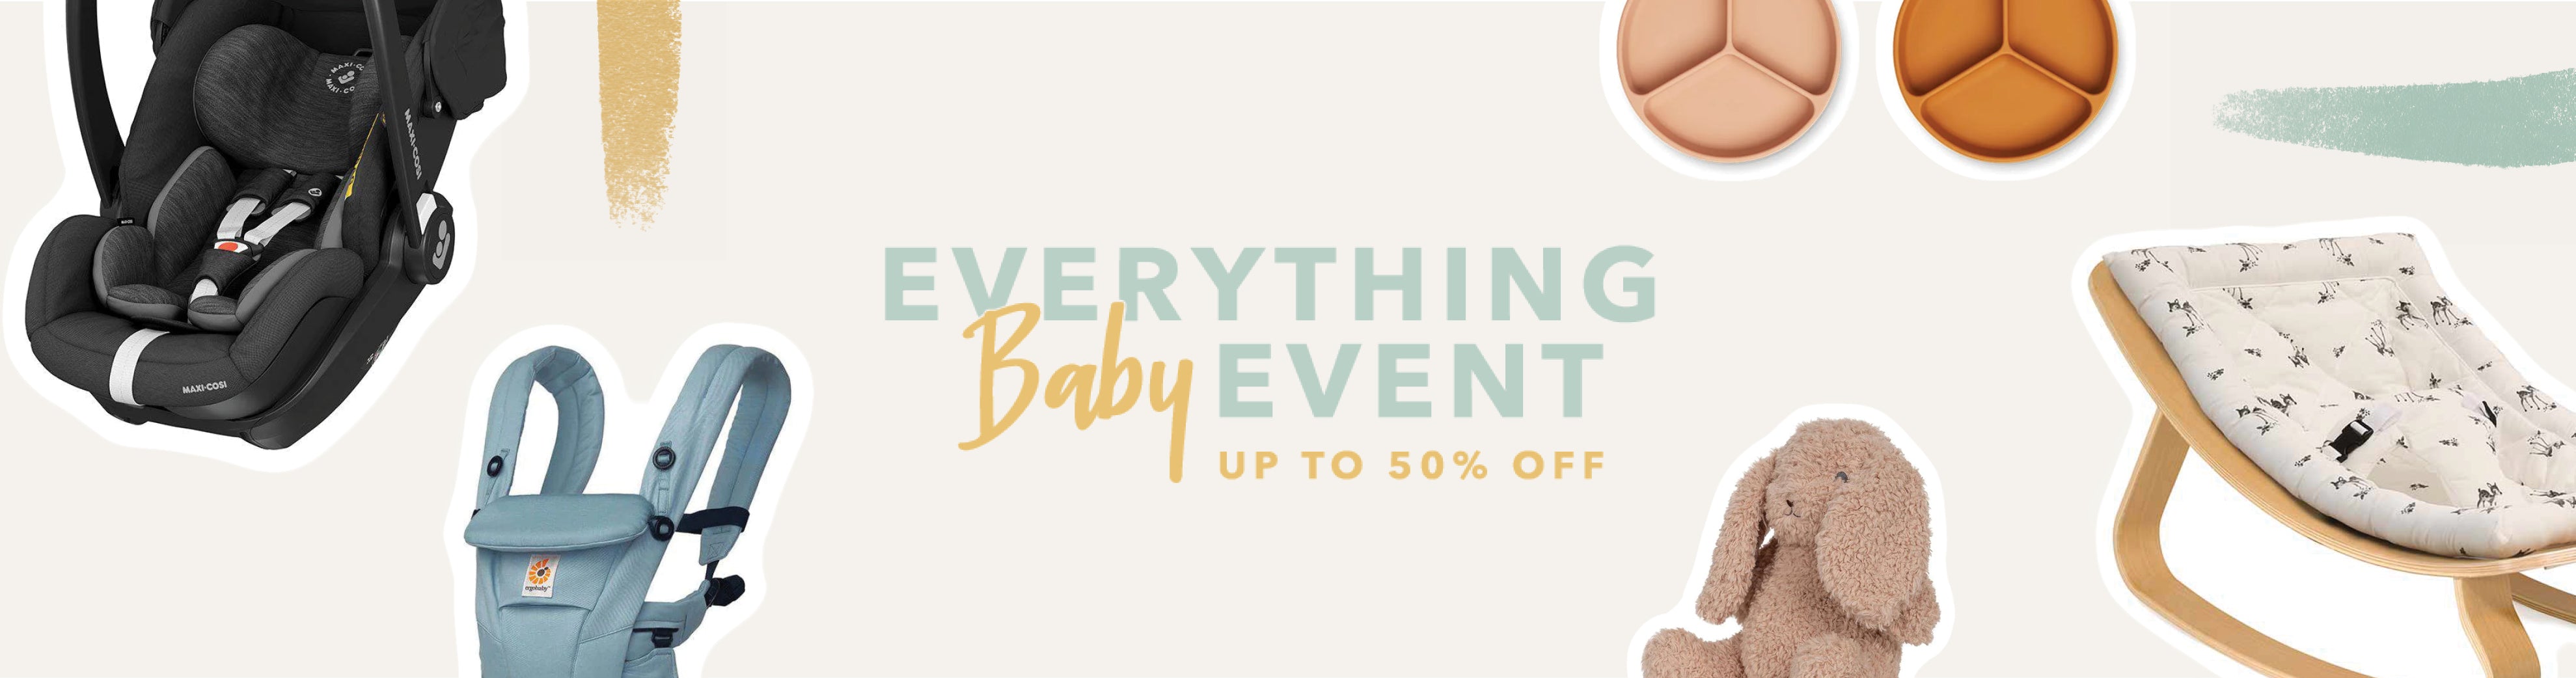 website-banners_1 | Natural Baby Shower